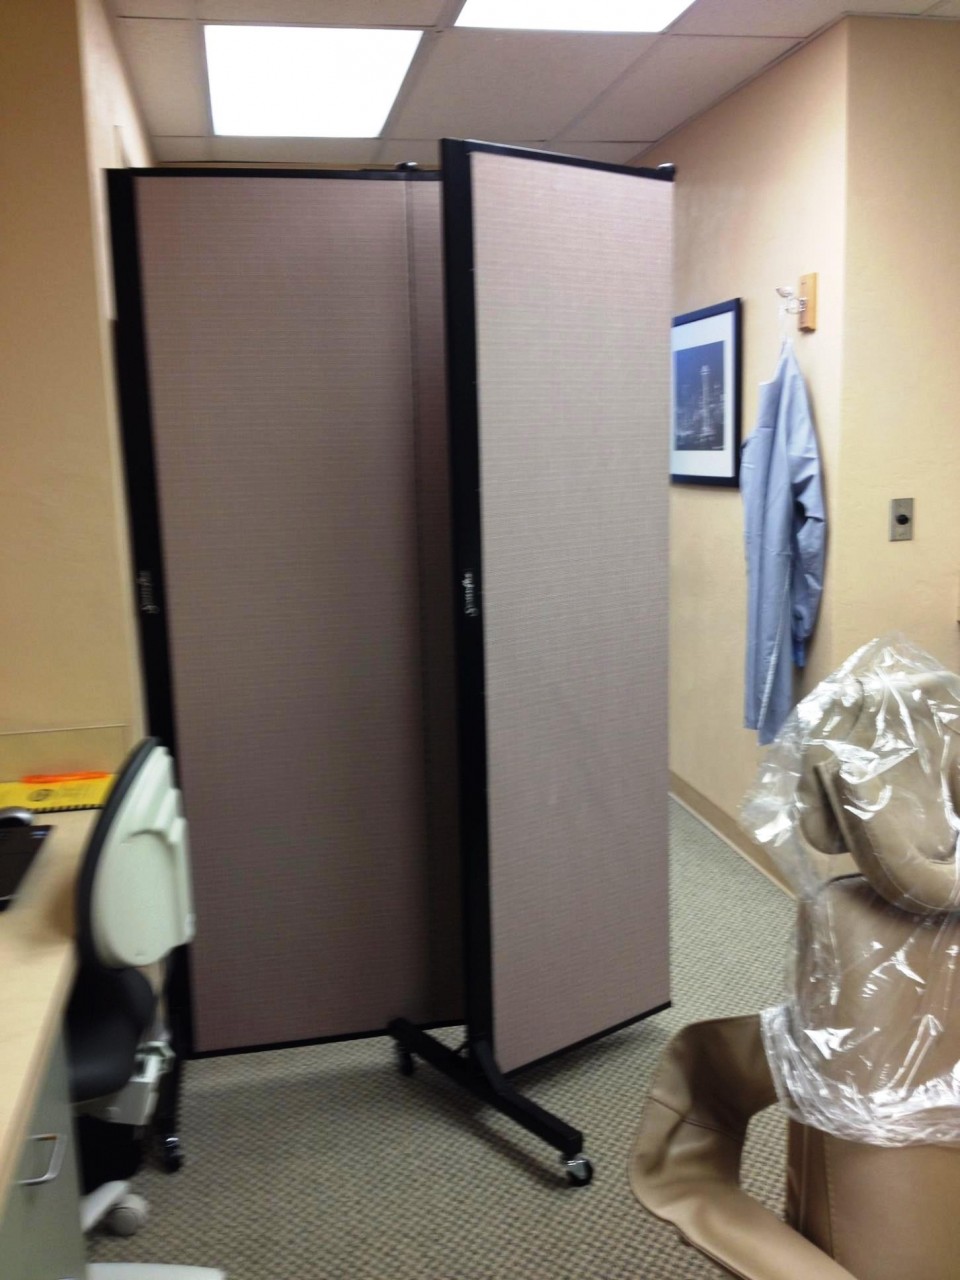 A room divider creating a private dental exam room